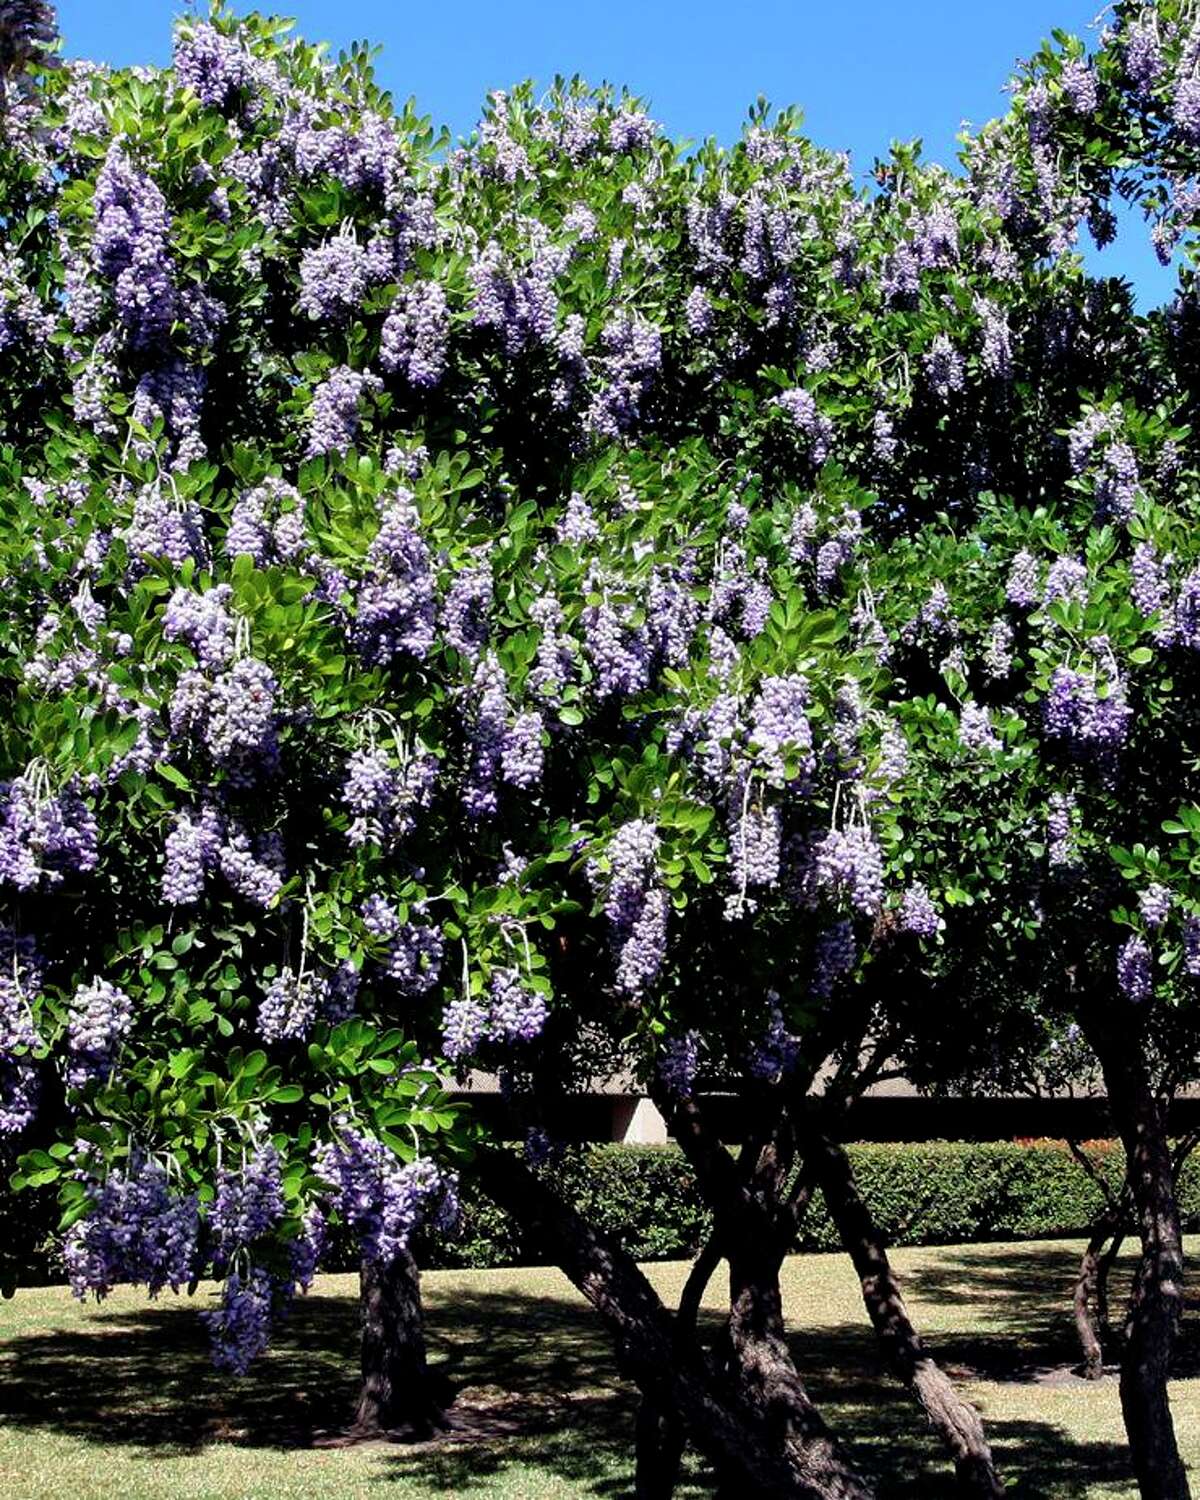 Texas mountain laurel didn’t bloom this year because of the freeze, but it should bloom again next year.